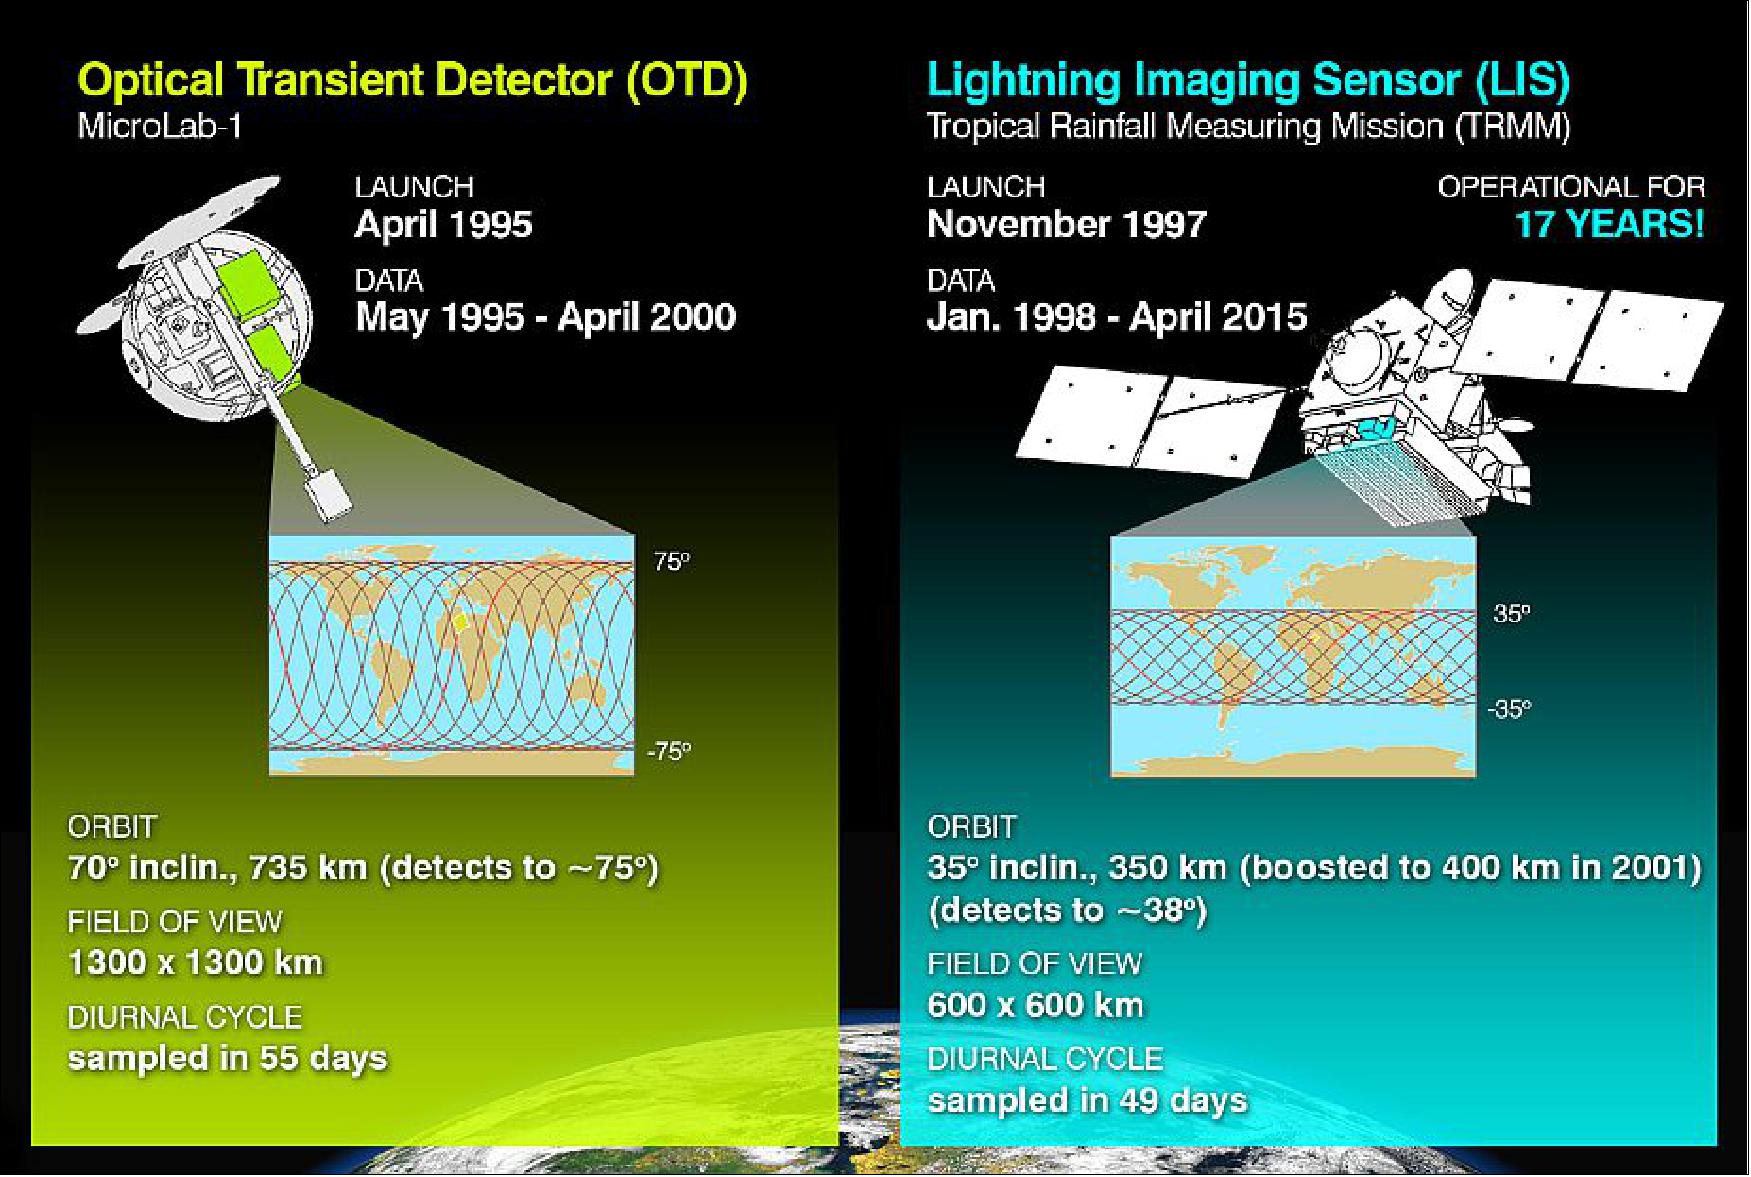 Figure 2: Since 1995, OTD and LIS on TRMM have provided 20 years of continuous combined lightning observations to create a robust global lightning climatology throughout the diurnal cycle (image credit: NASA and the University of Alabama in Huntsville (UAH))